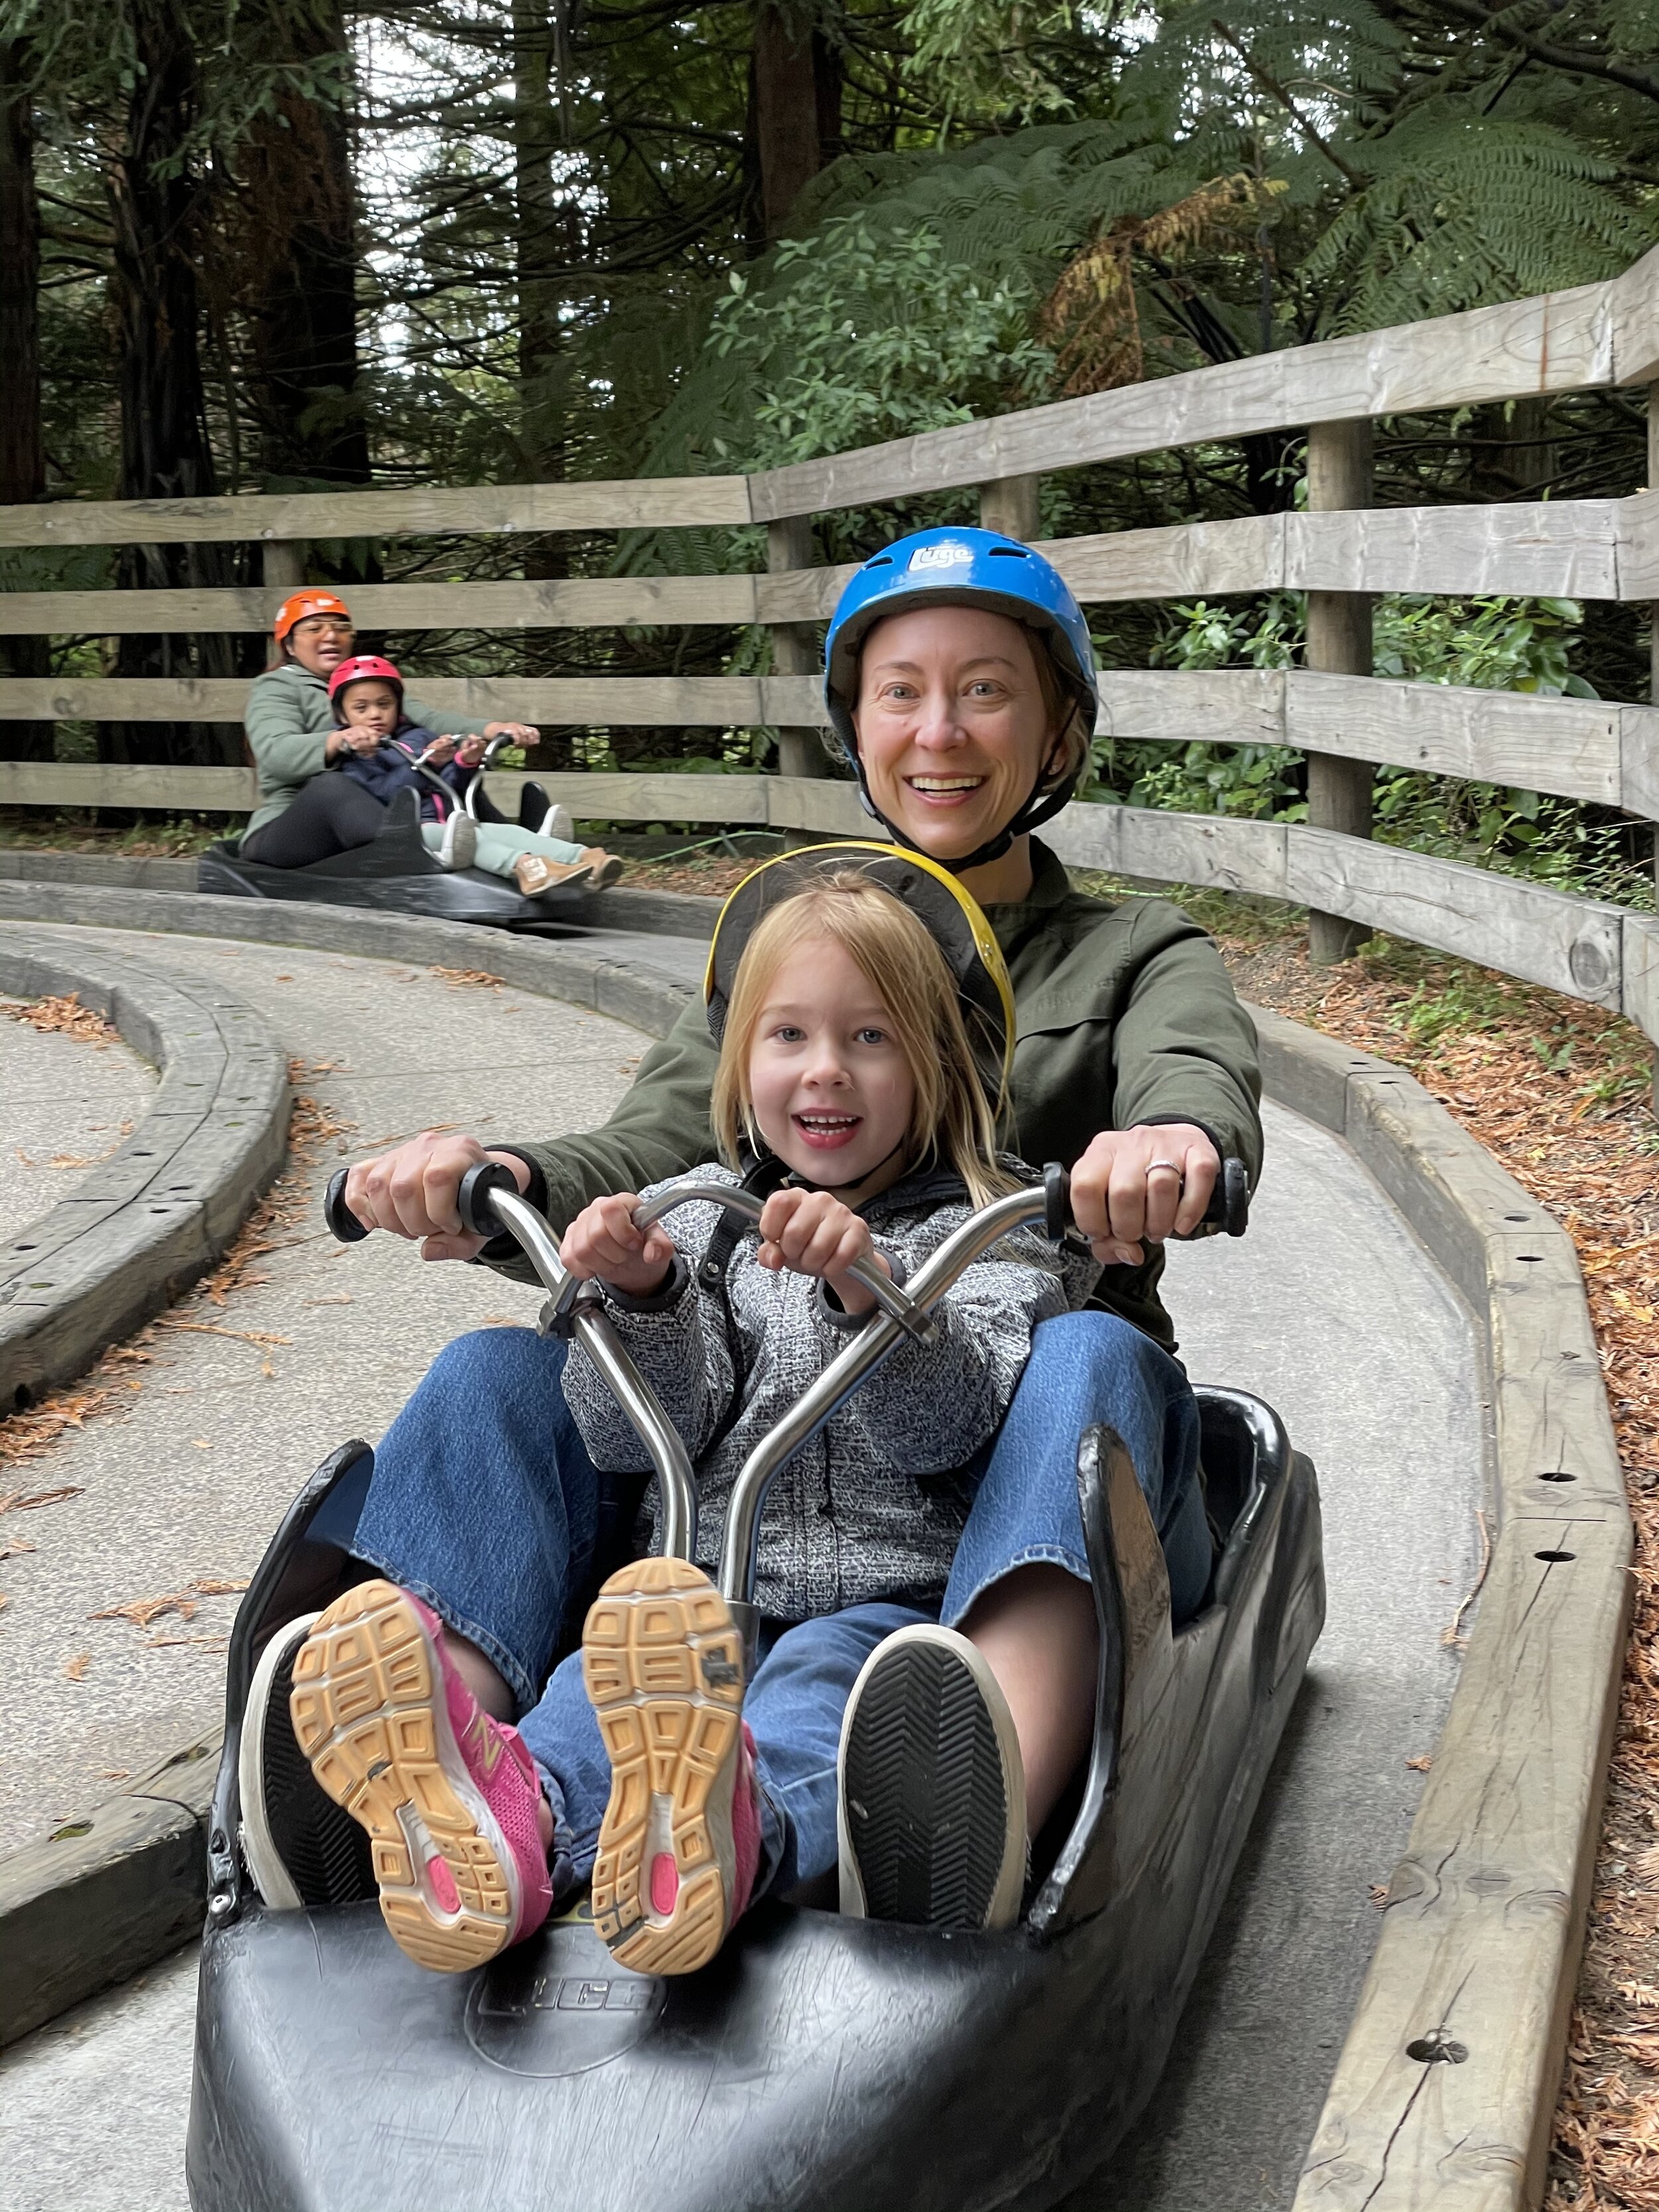 Luge time!